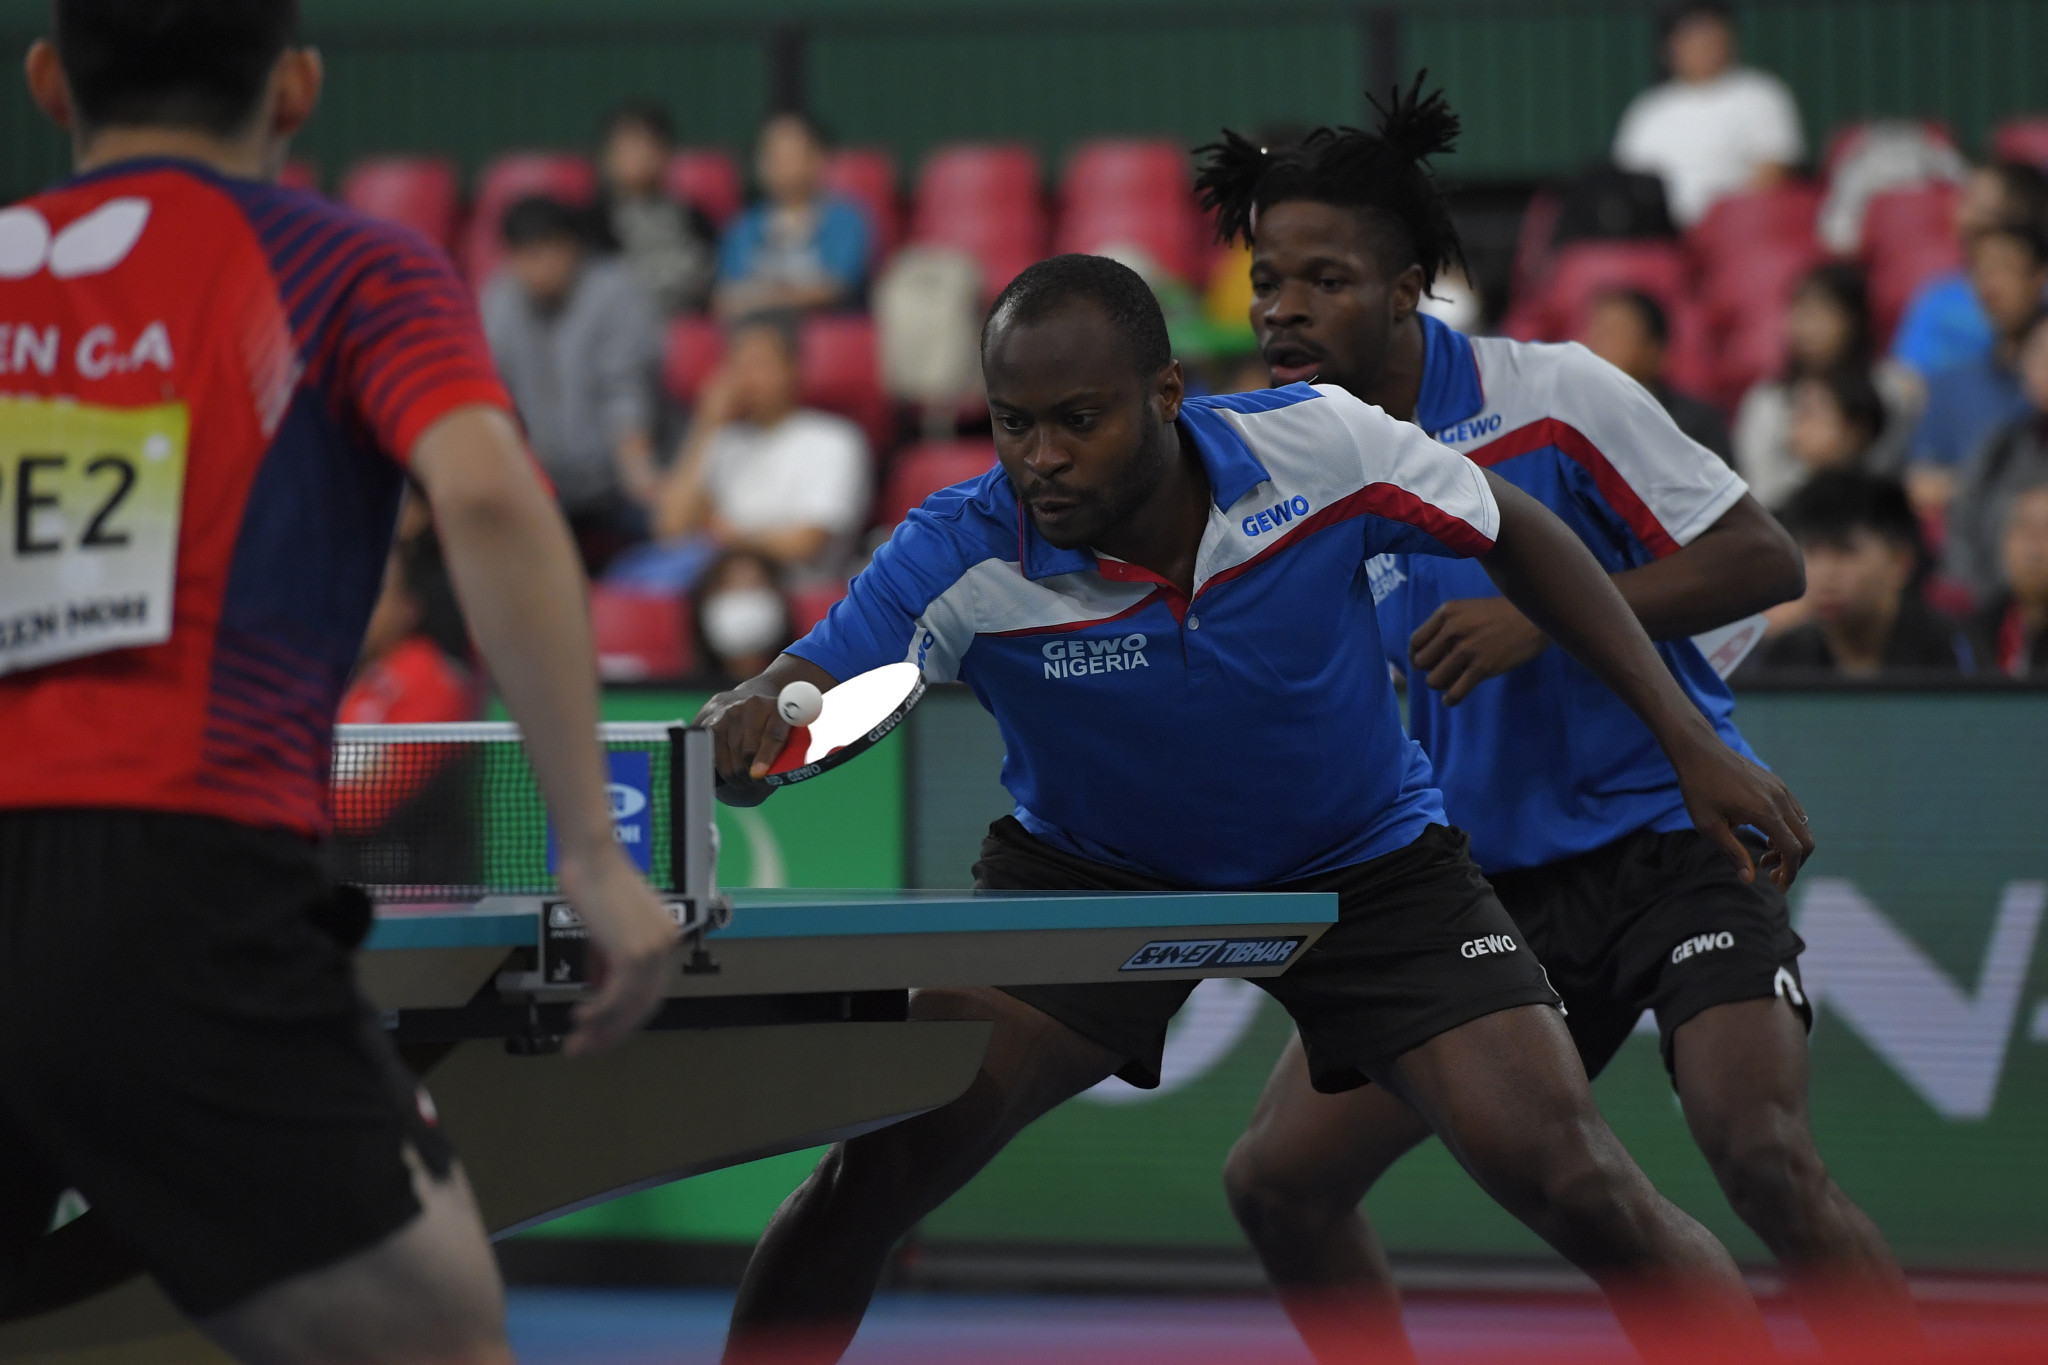 The African Table Tennis Federation has partnered with Athletic Club de Boulogne-Billancourt to develop talent for Paris 2024 ©Getty Images